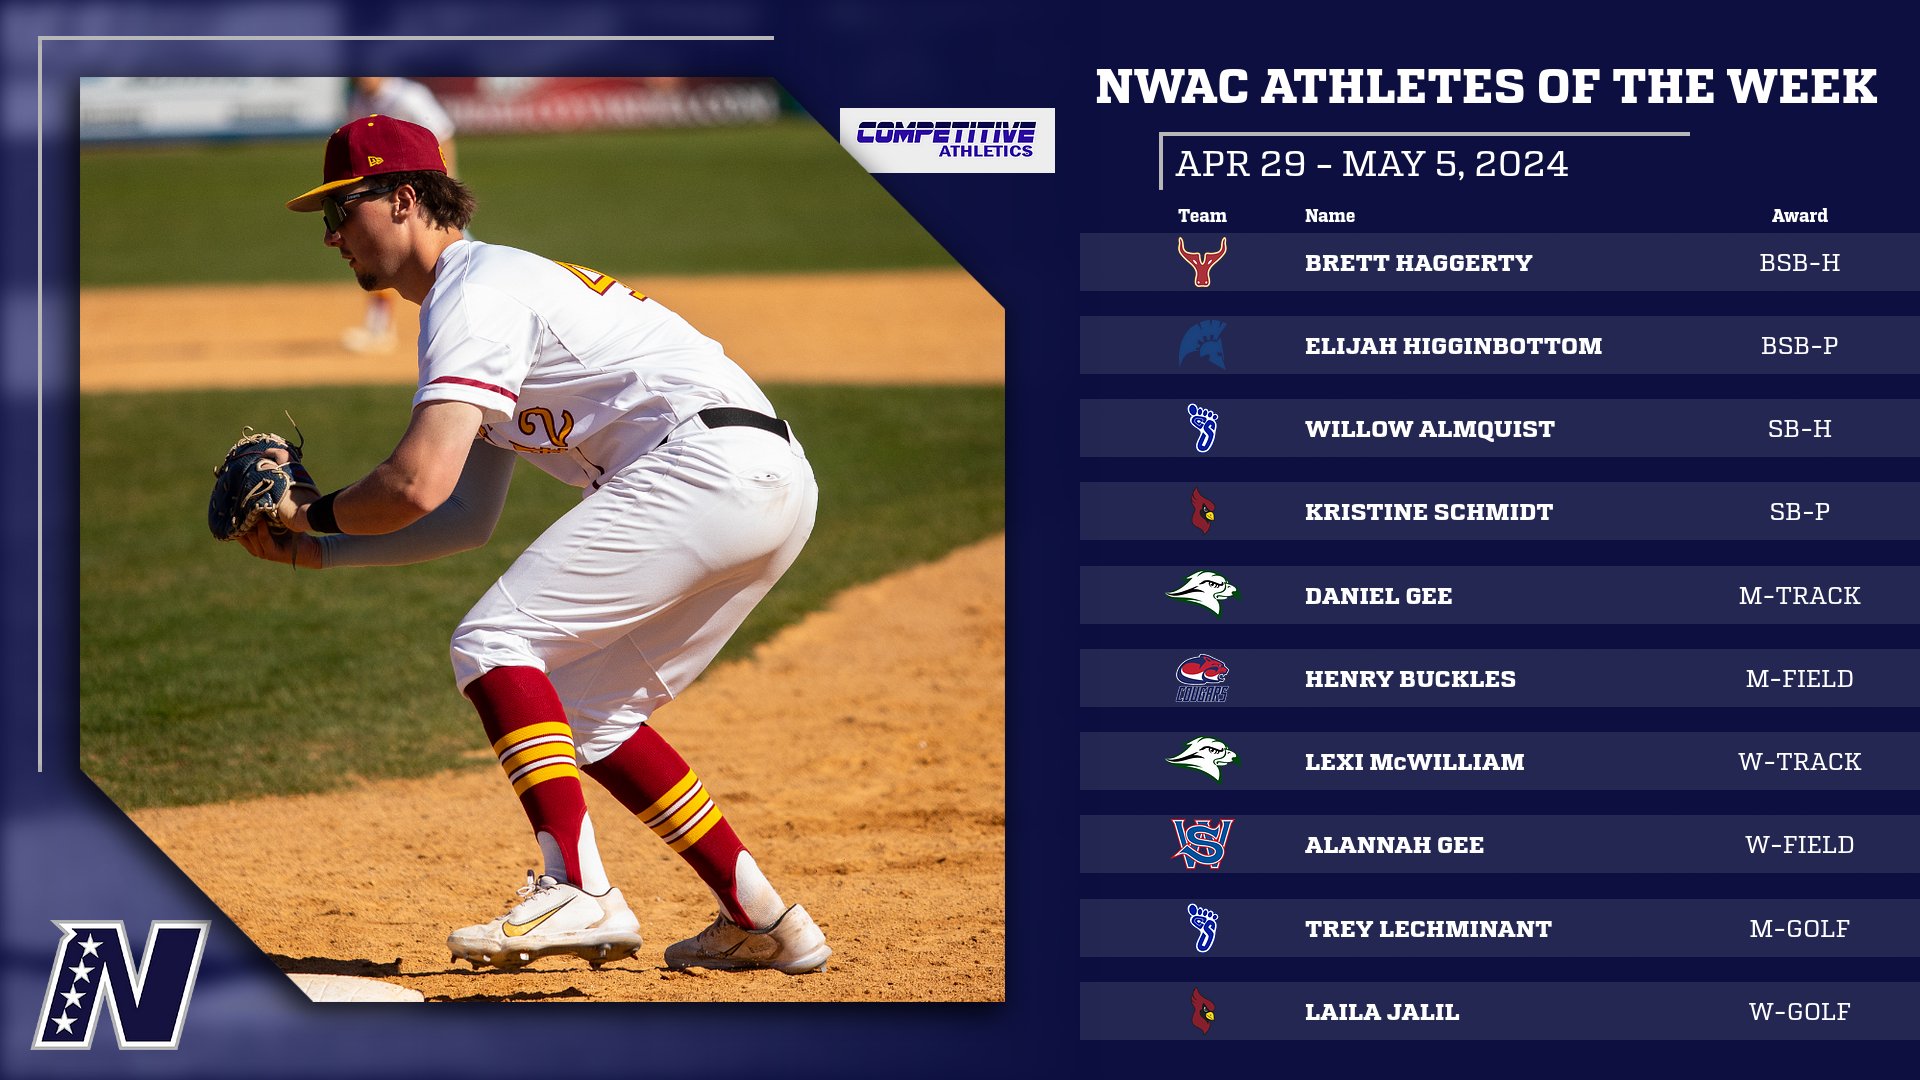 Competitive Athletics NWAC Athletes of the Week: April 29 - May 5